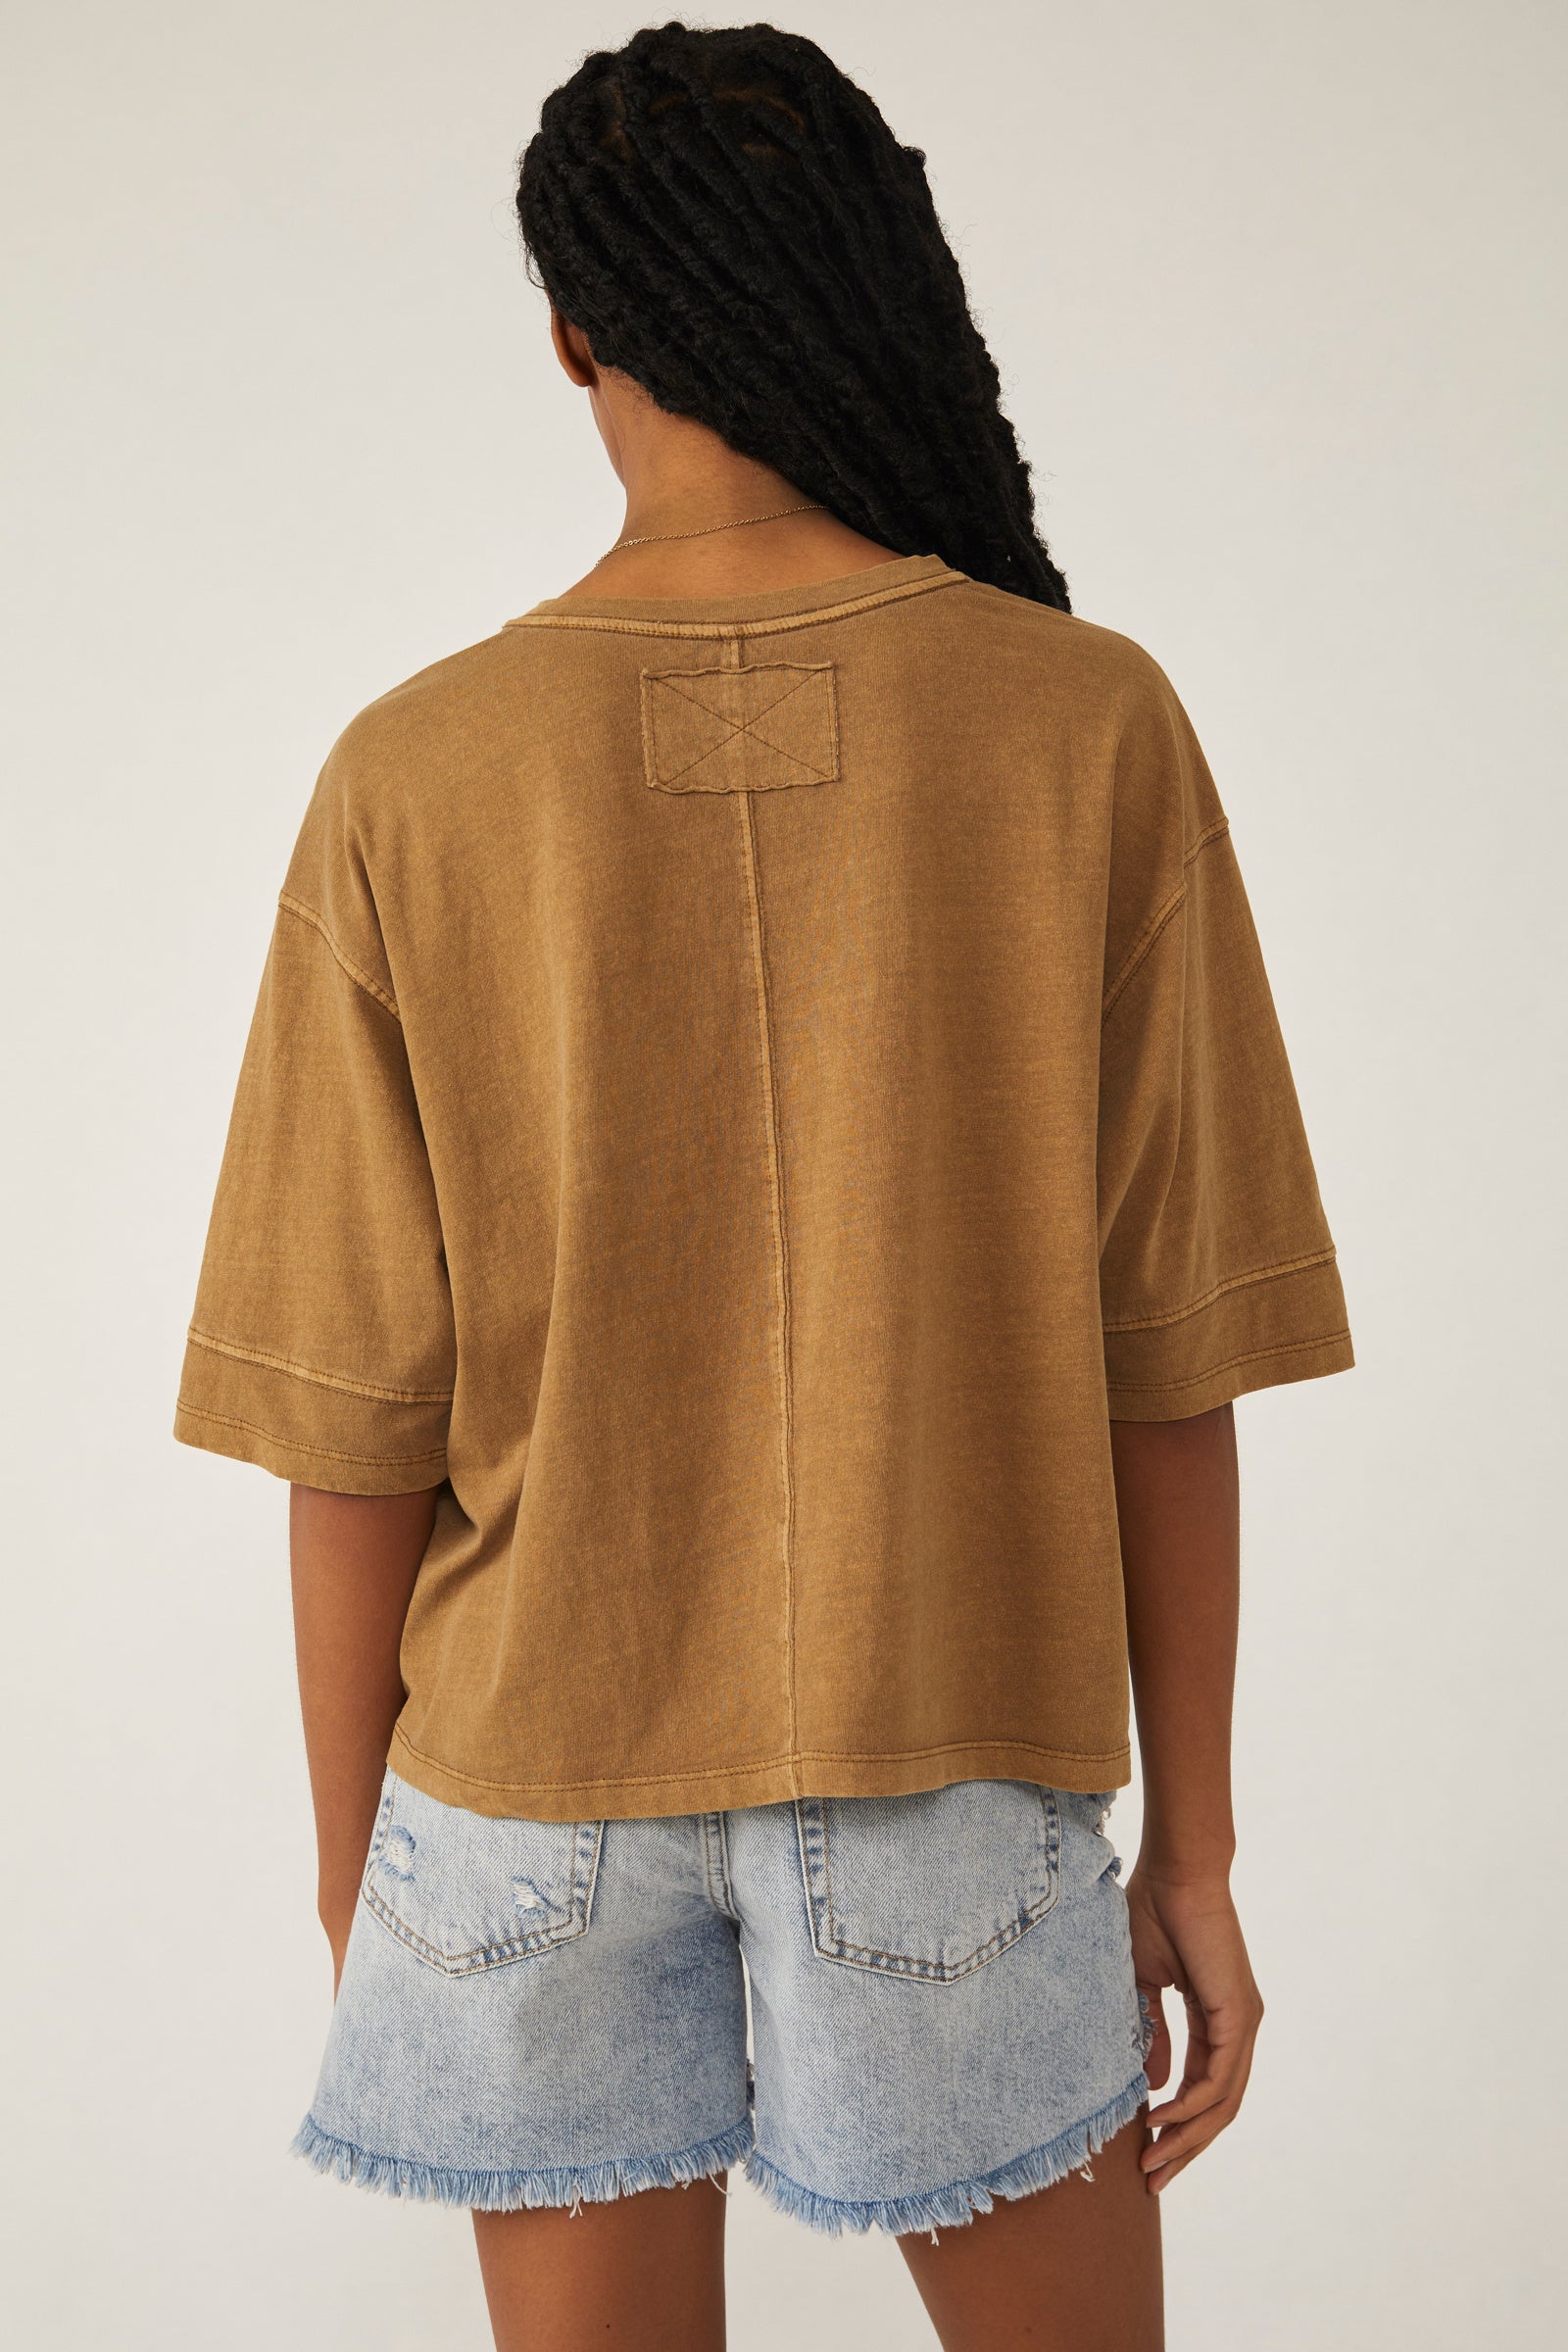 Free People Alissa Tee In Golden Olive